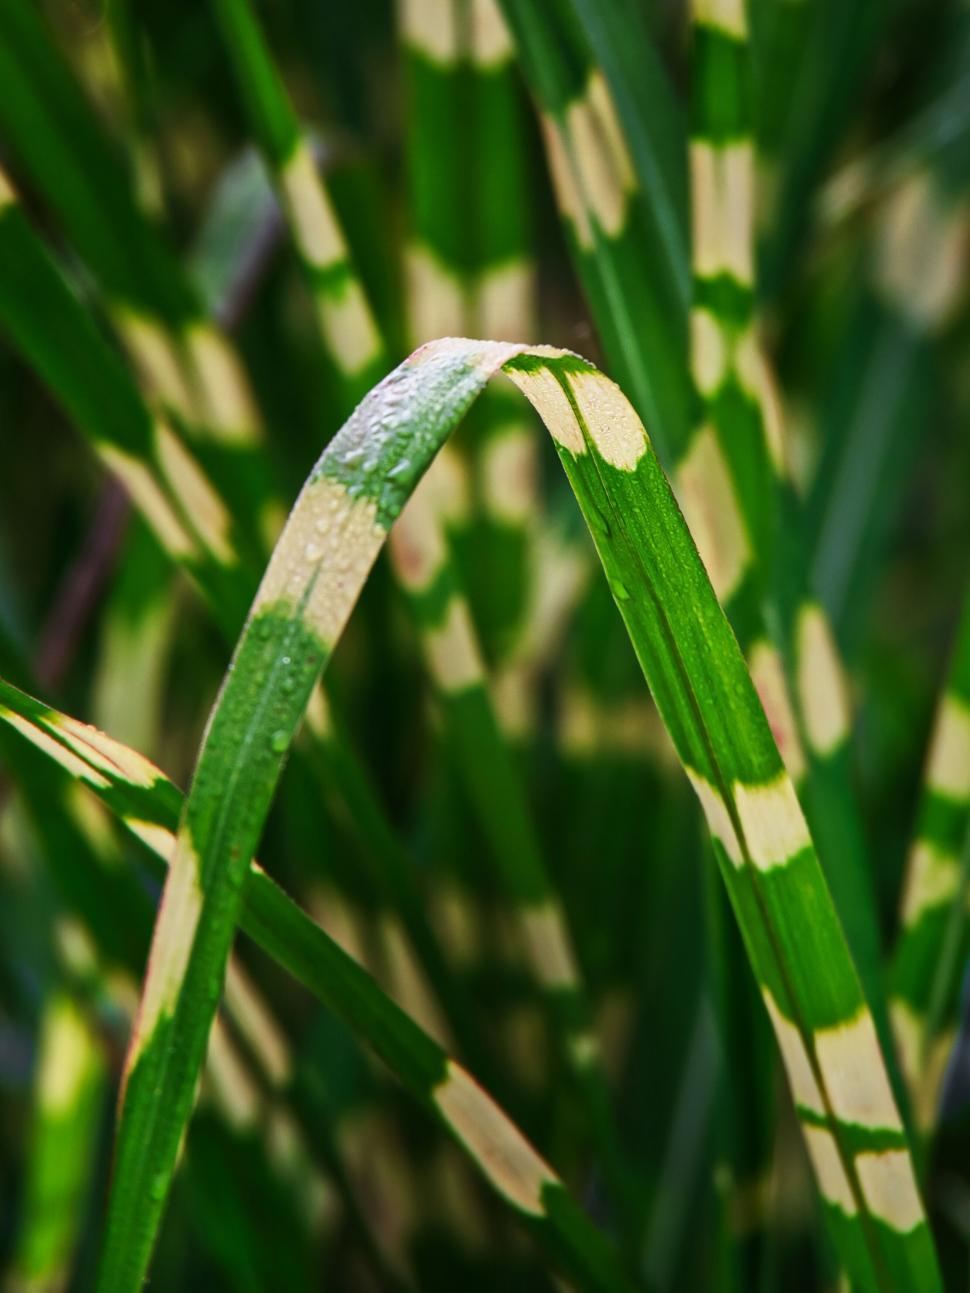 Free Image of Dew on Vibrant Green Striped Grass Blades 